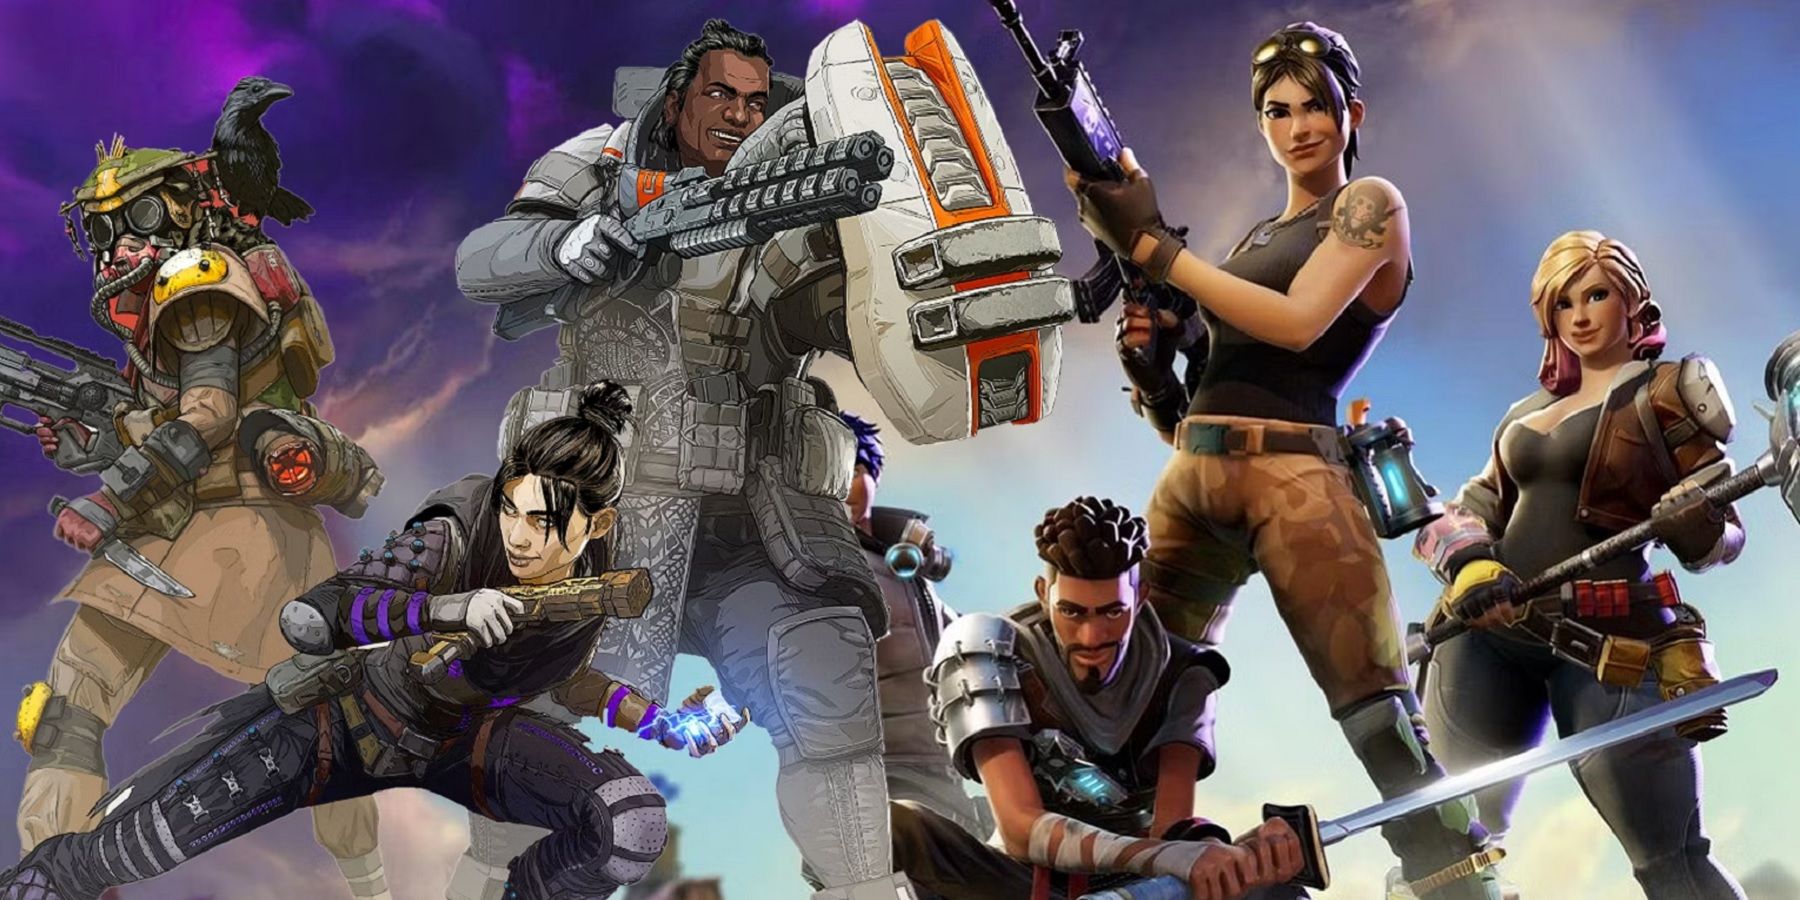 Apex Legends and Fortnite characters stand side by side